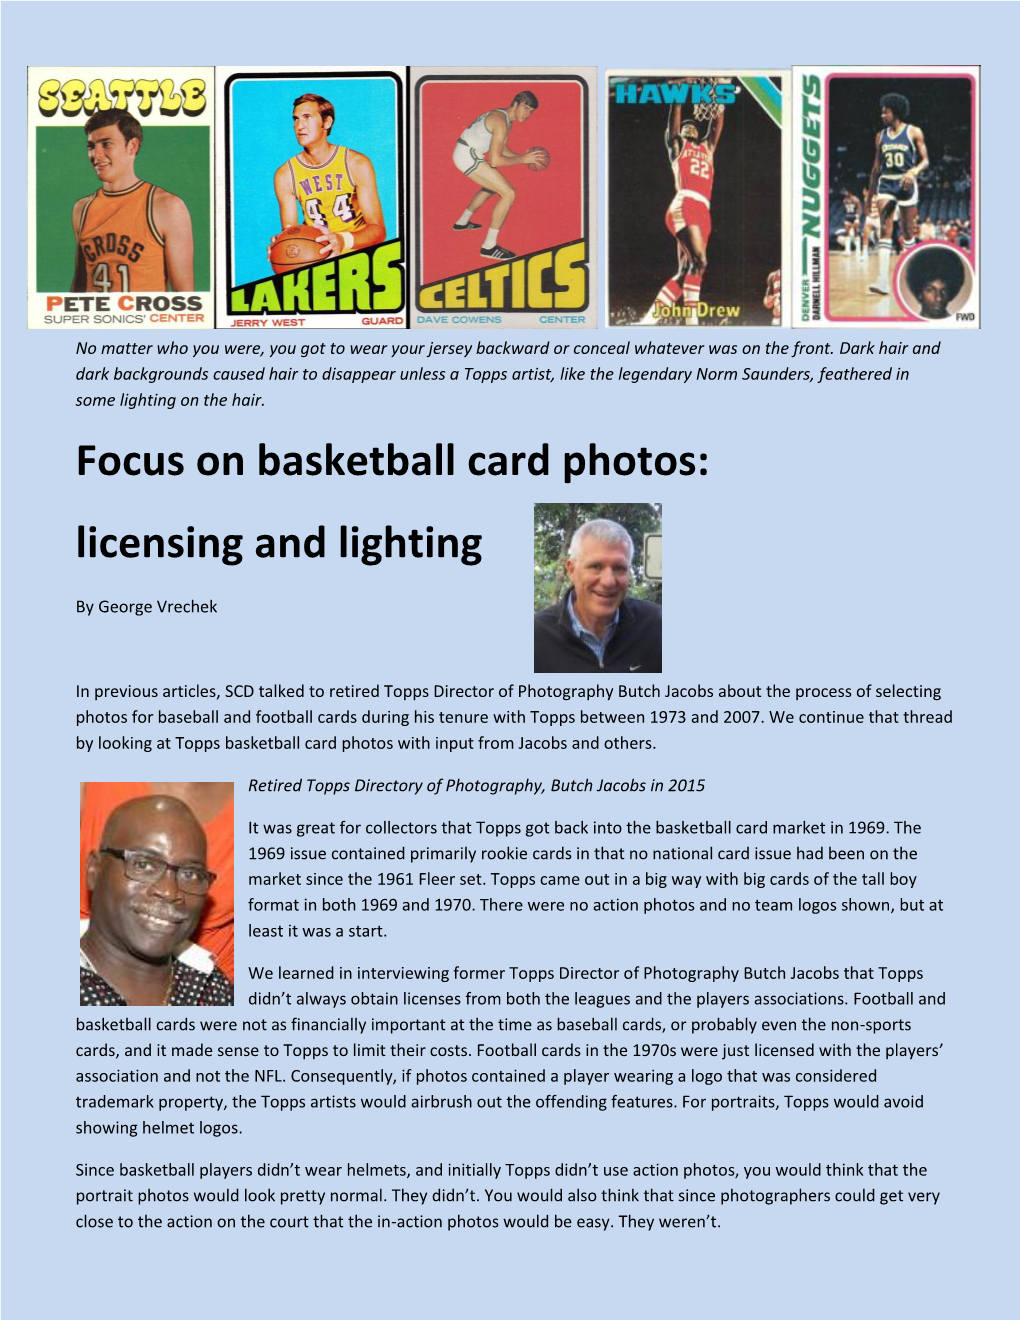 Focus on Basketball Card Photos: Licensing and Lighting